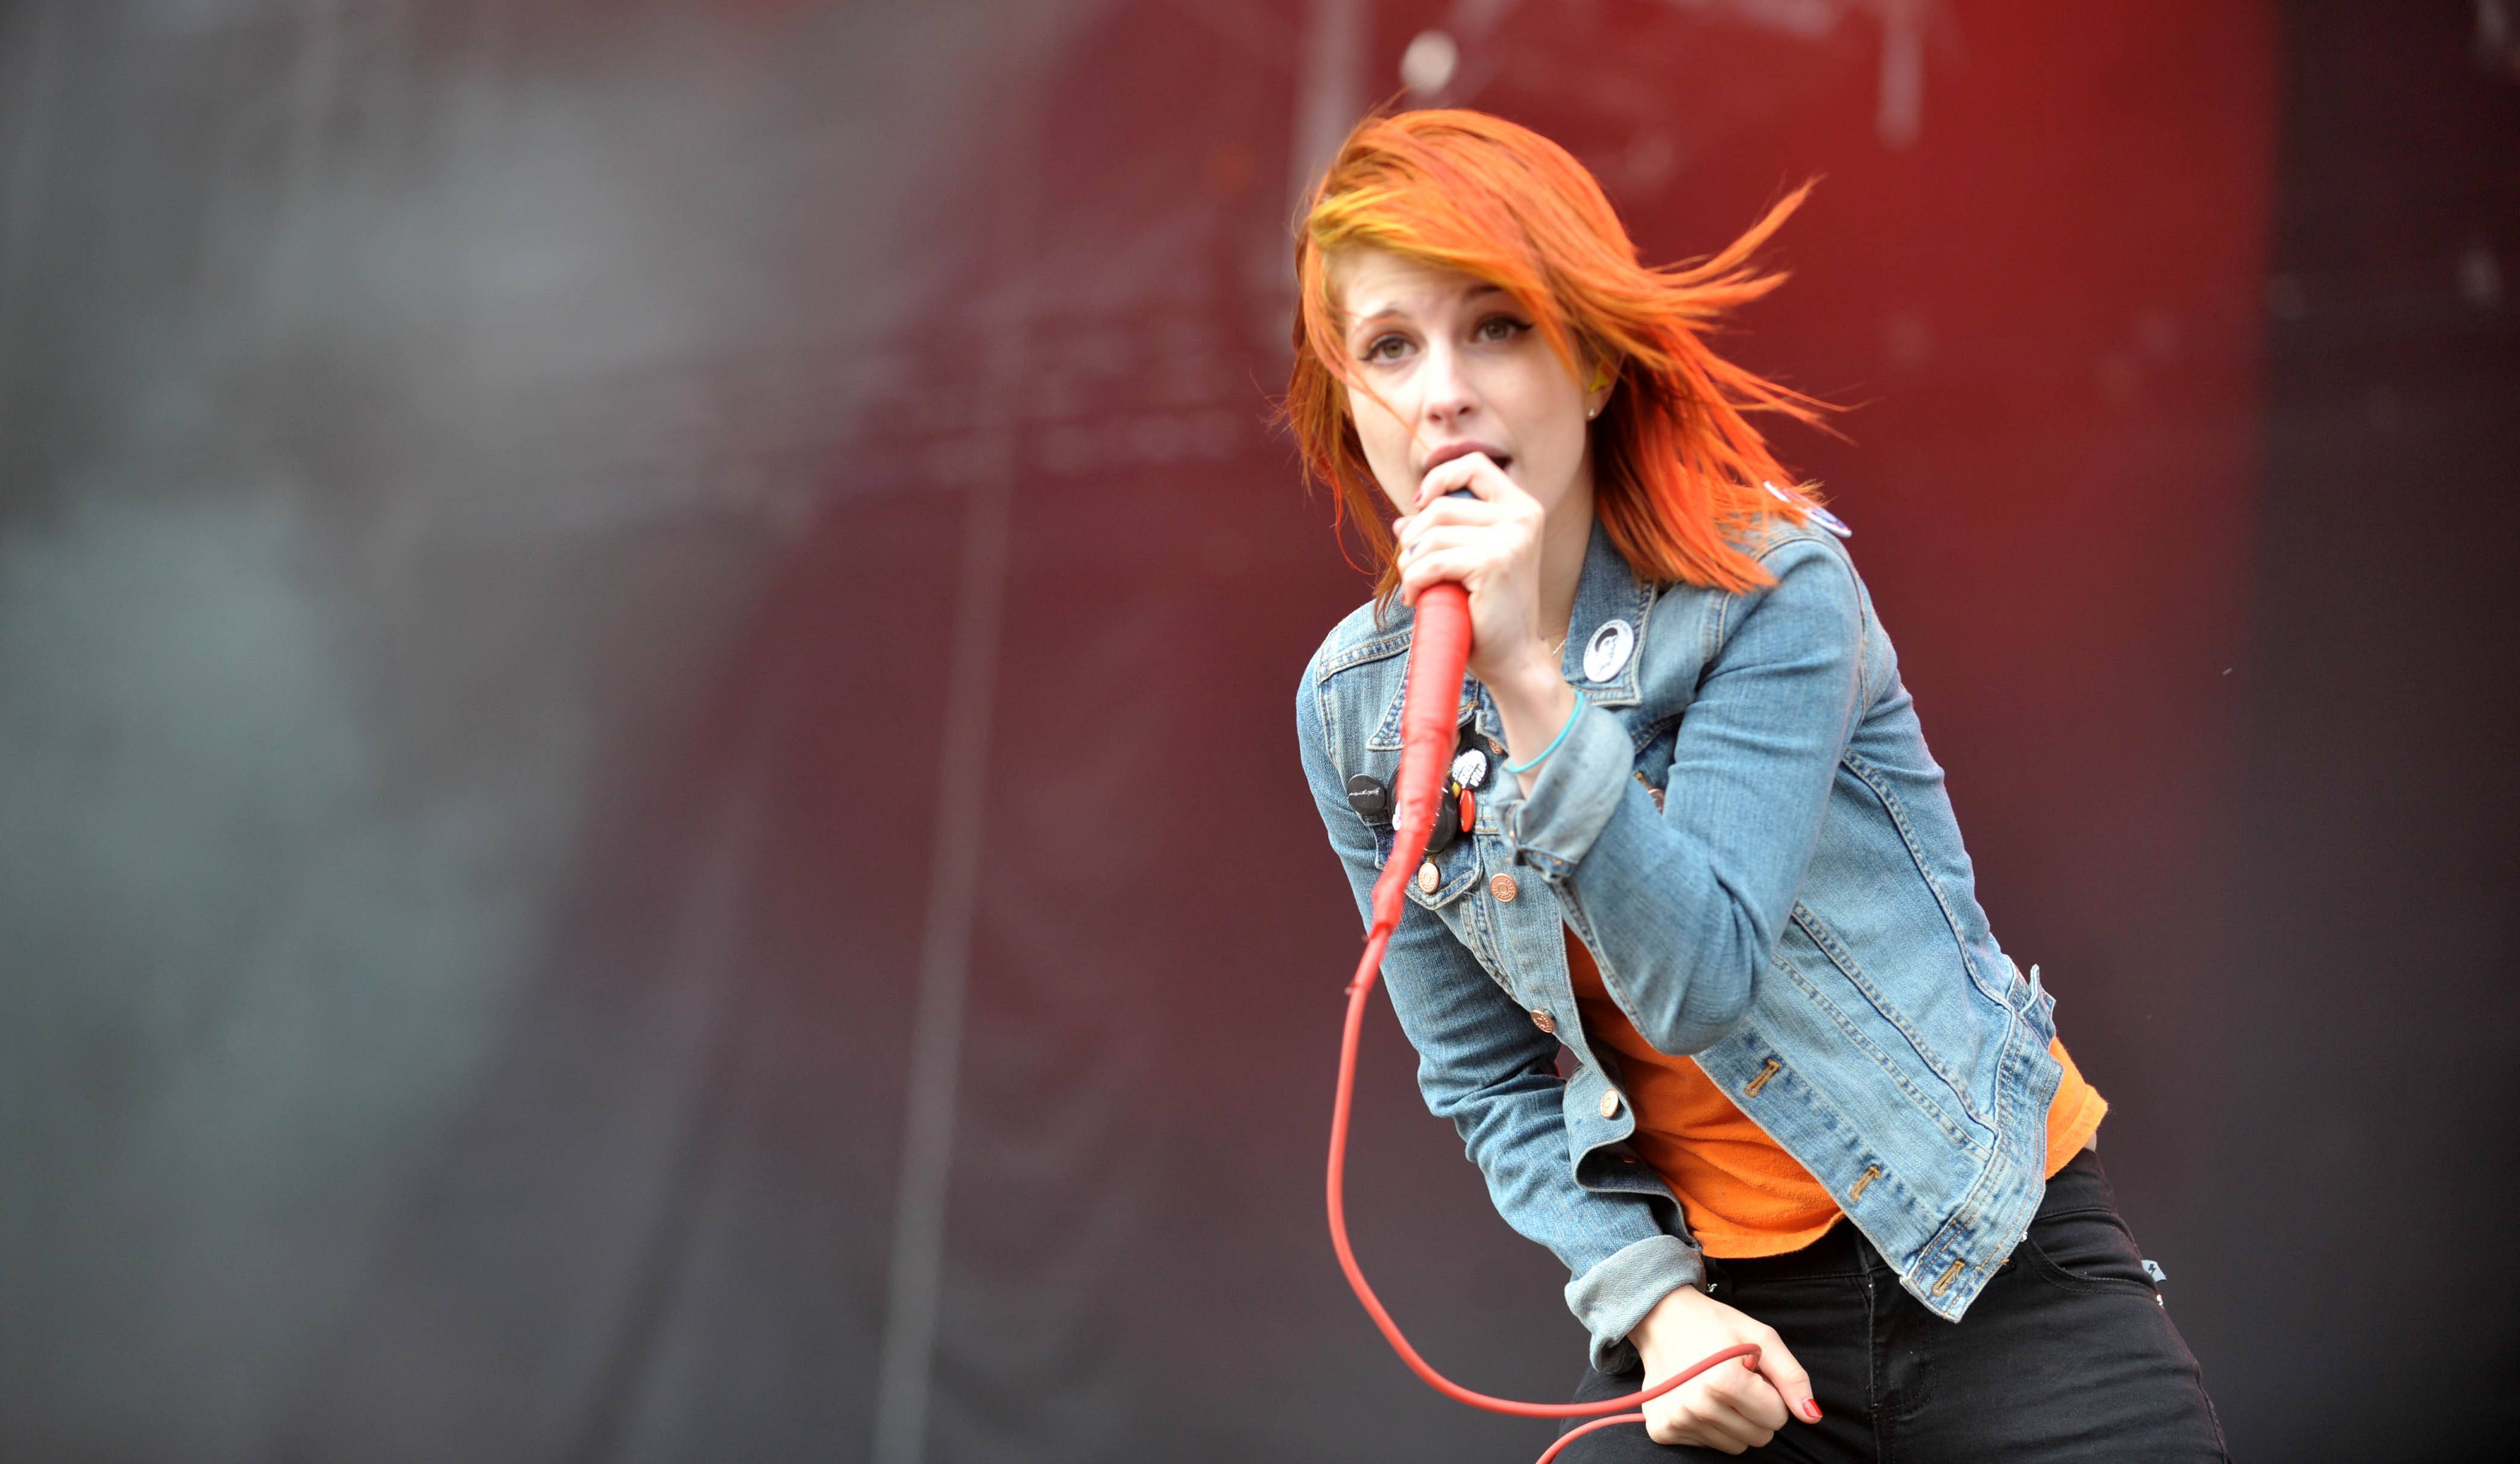 Hayley williams Paramore Singer Stage Microphone Speech